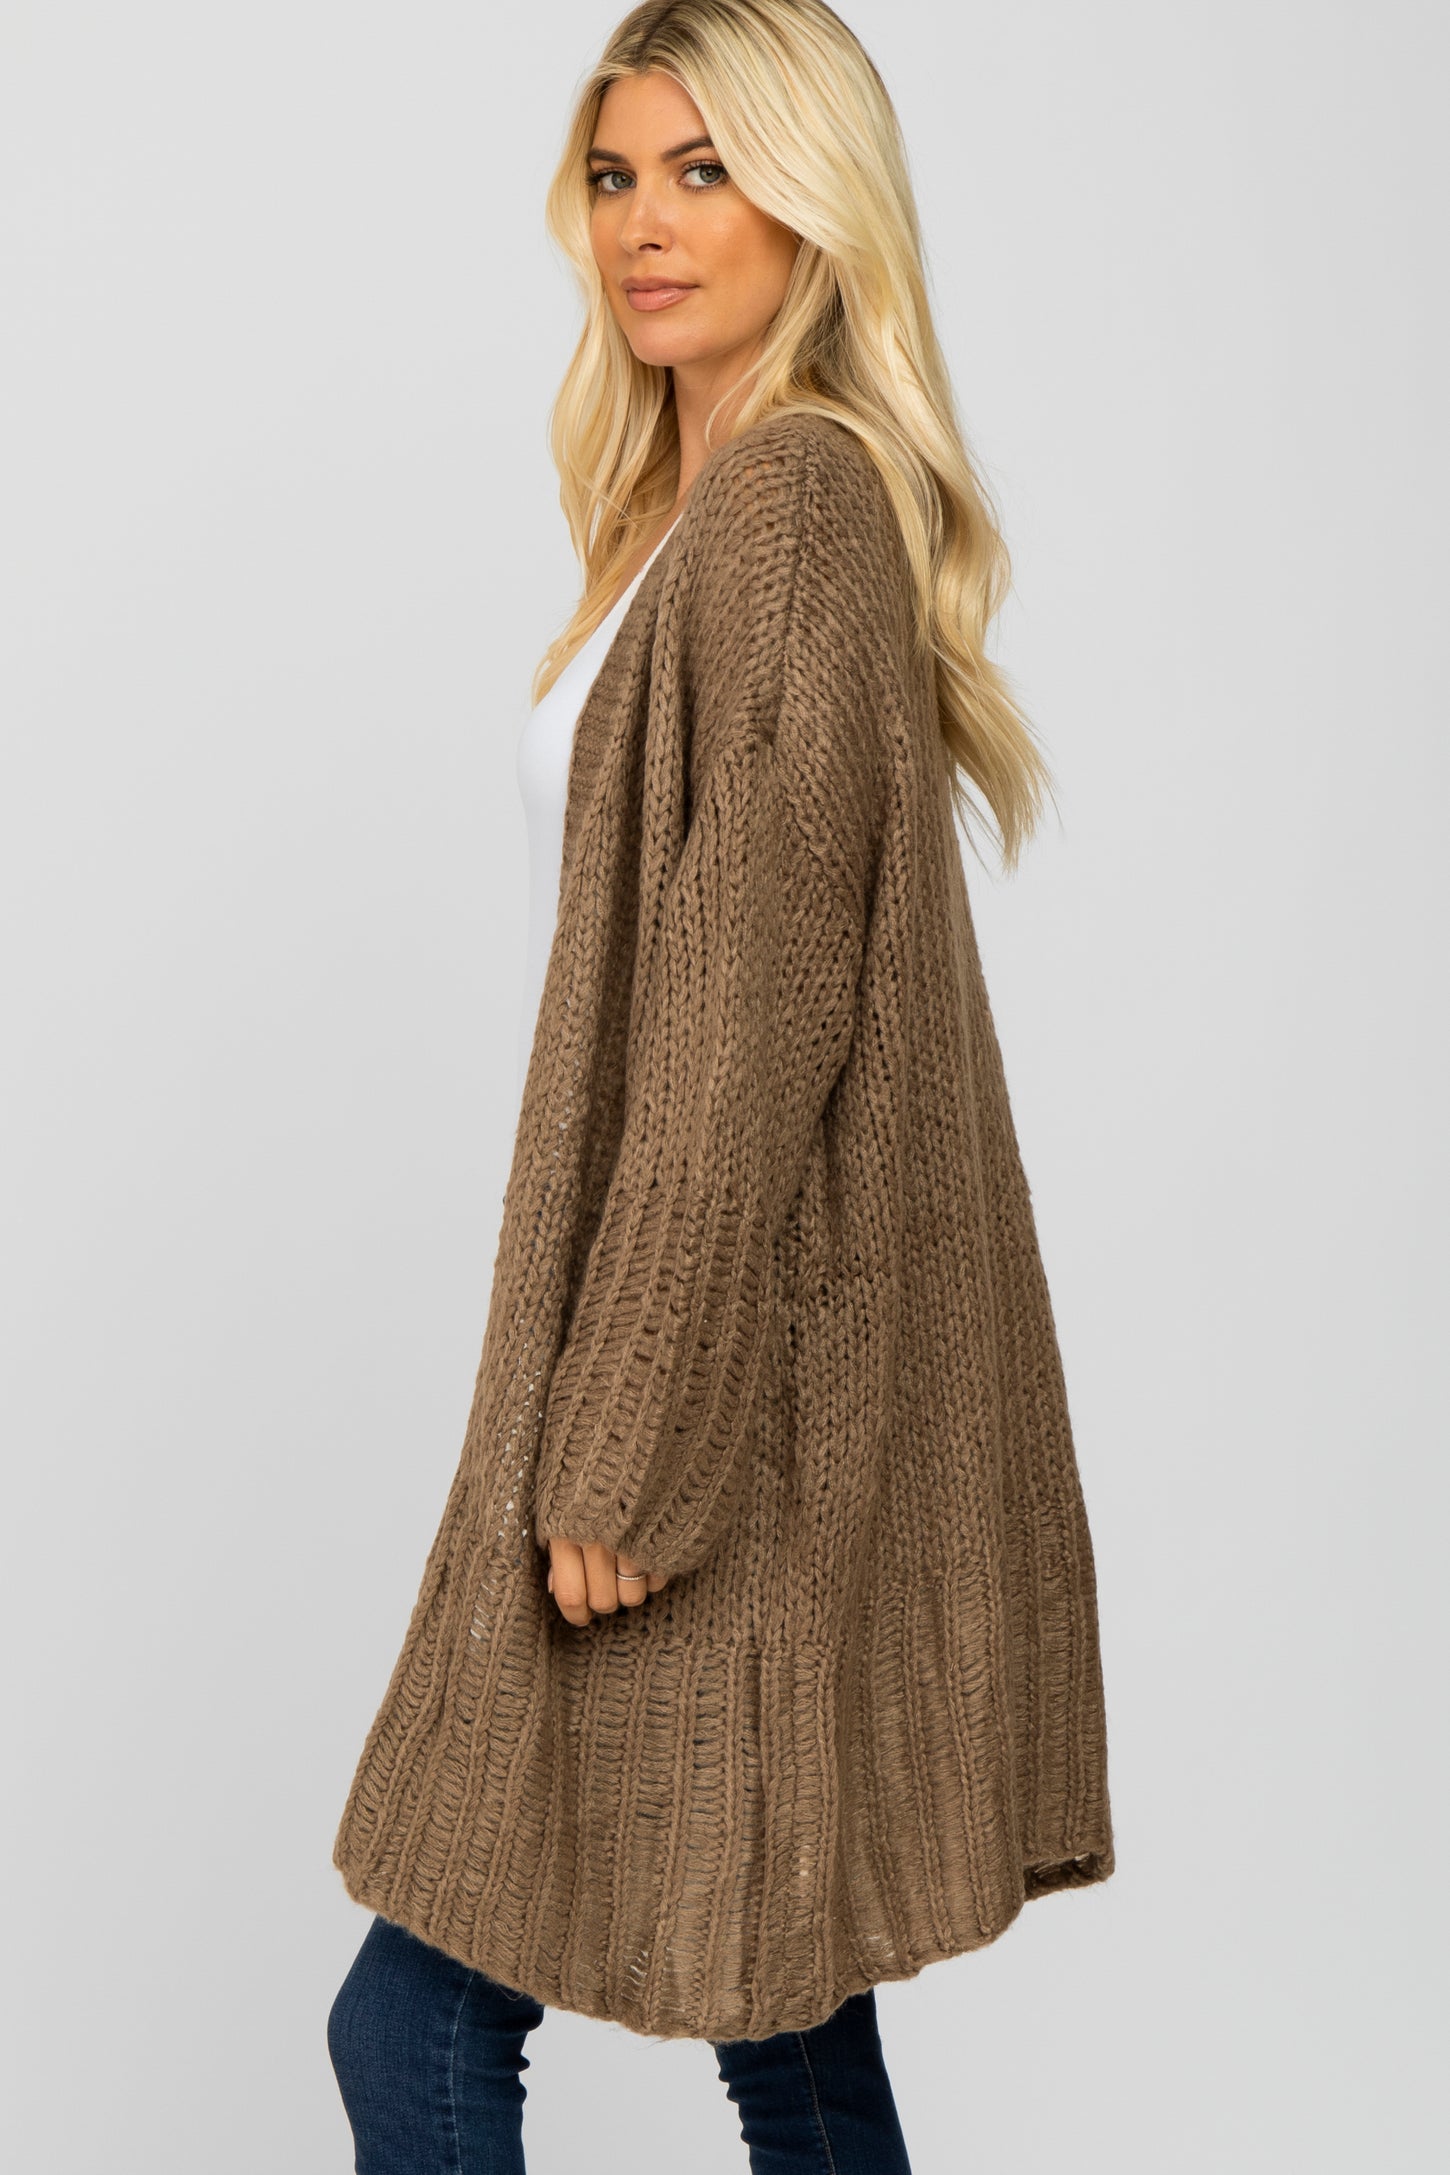 Taupe Open Knit Cardigan Sweater